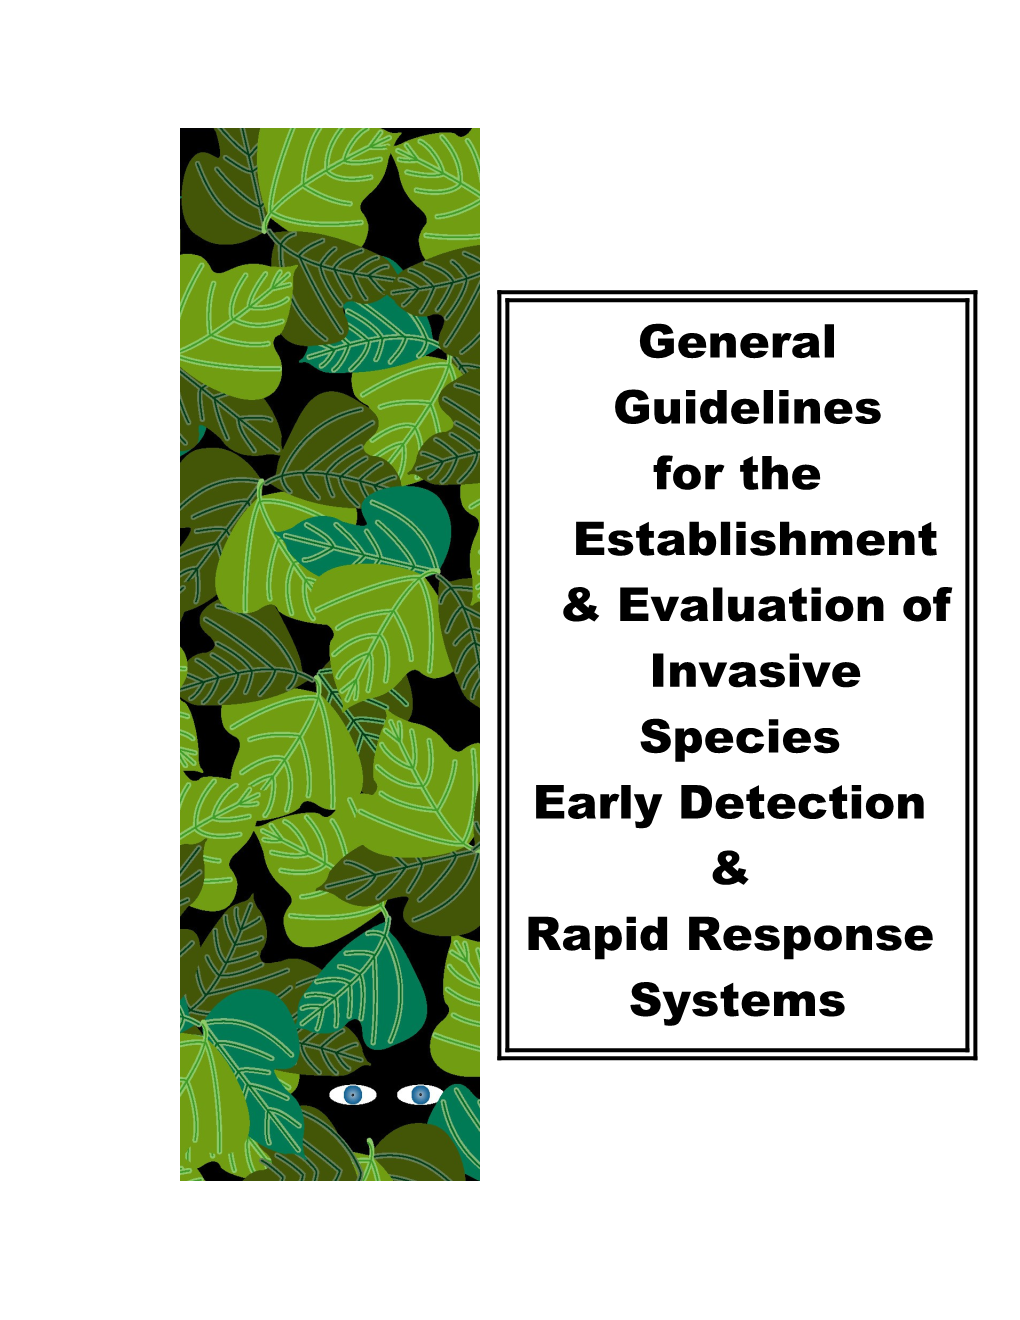 Guidelines for Early Detection and Rapid Response Systems